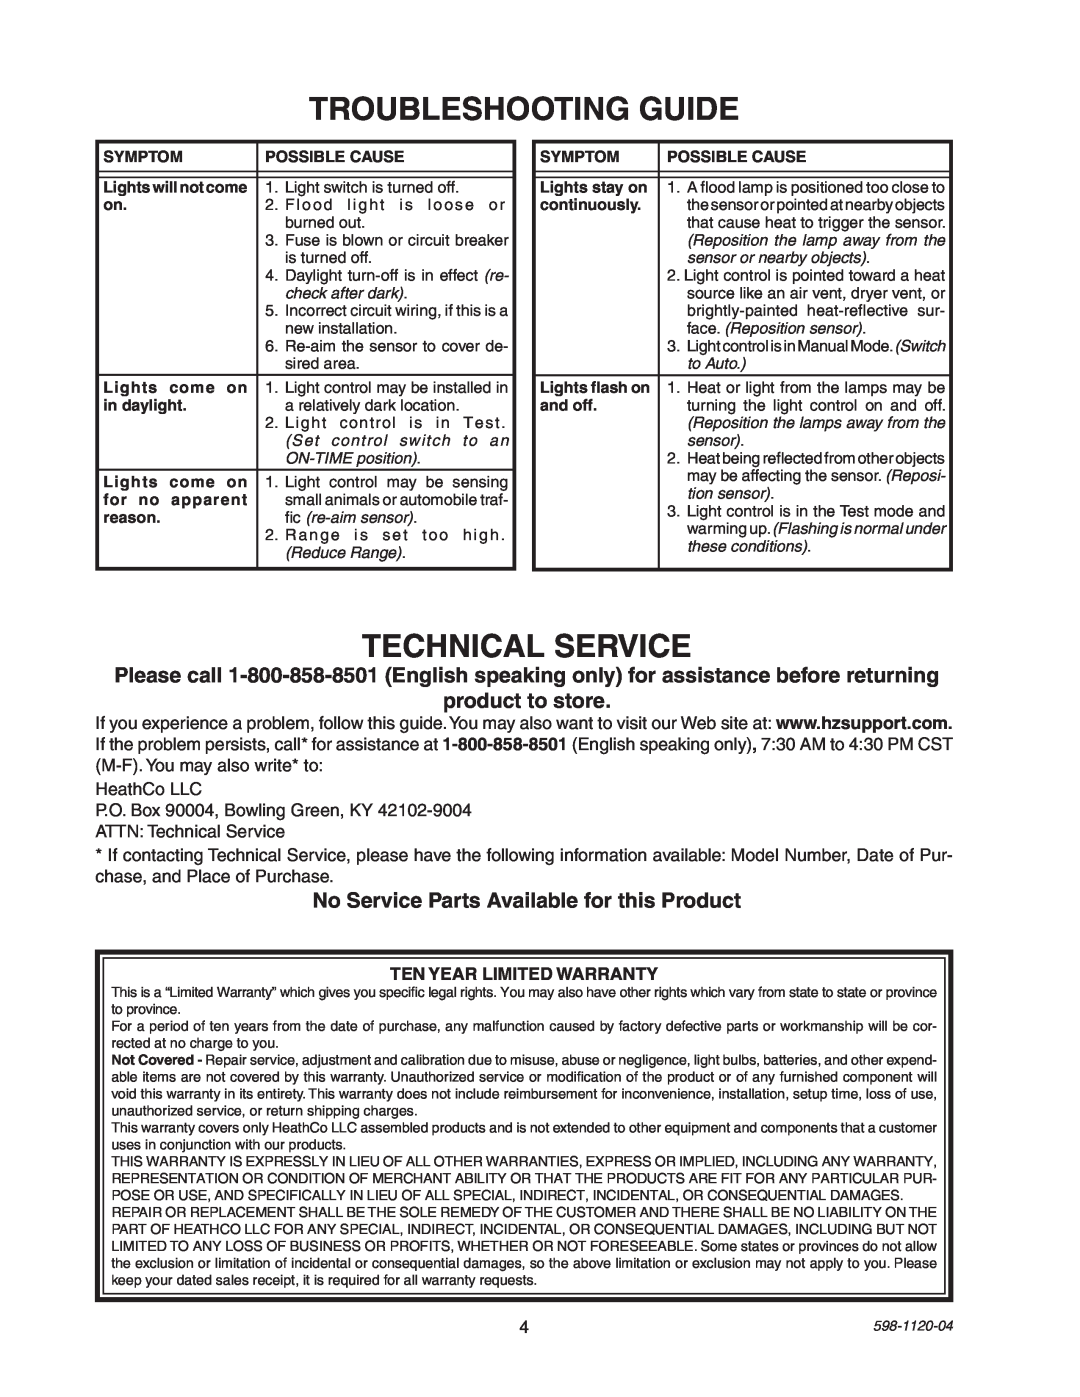 Heath Zenith SL-5710 manual Troubleshooting Guide, Technical Service, product to store 